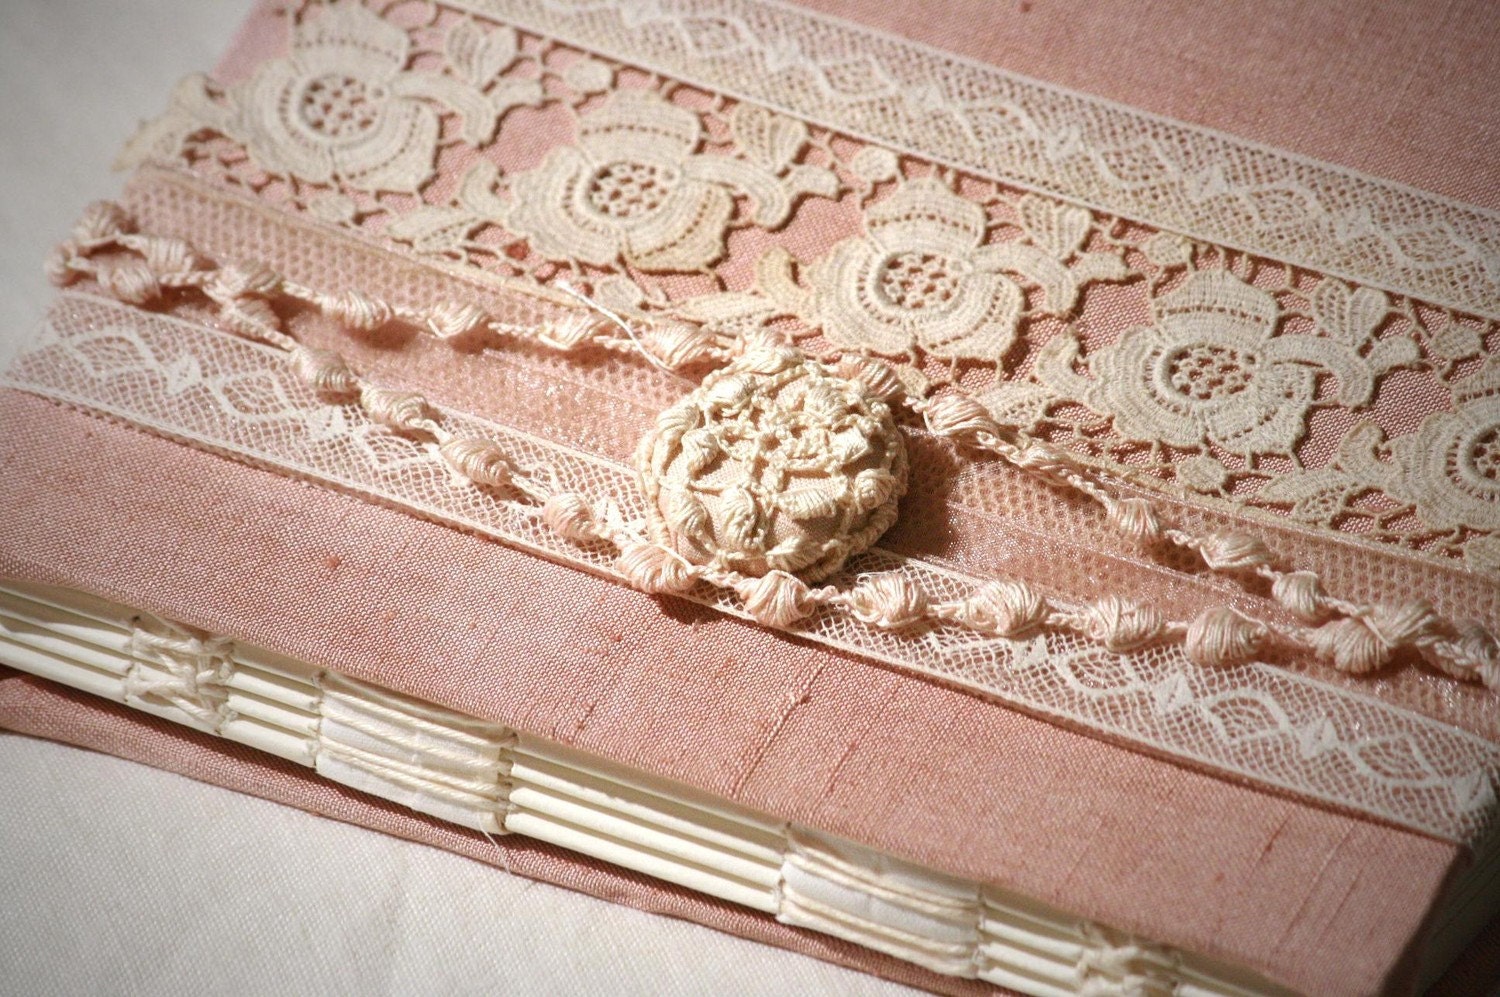 Guest Book - Rose Dust - Lace Wedding Guest Book, Ivory Lace and Pink Cream Pearls Embroidery on Netting Lace, Personalize, Handmade